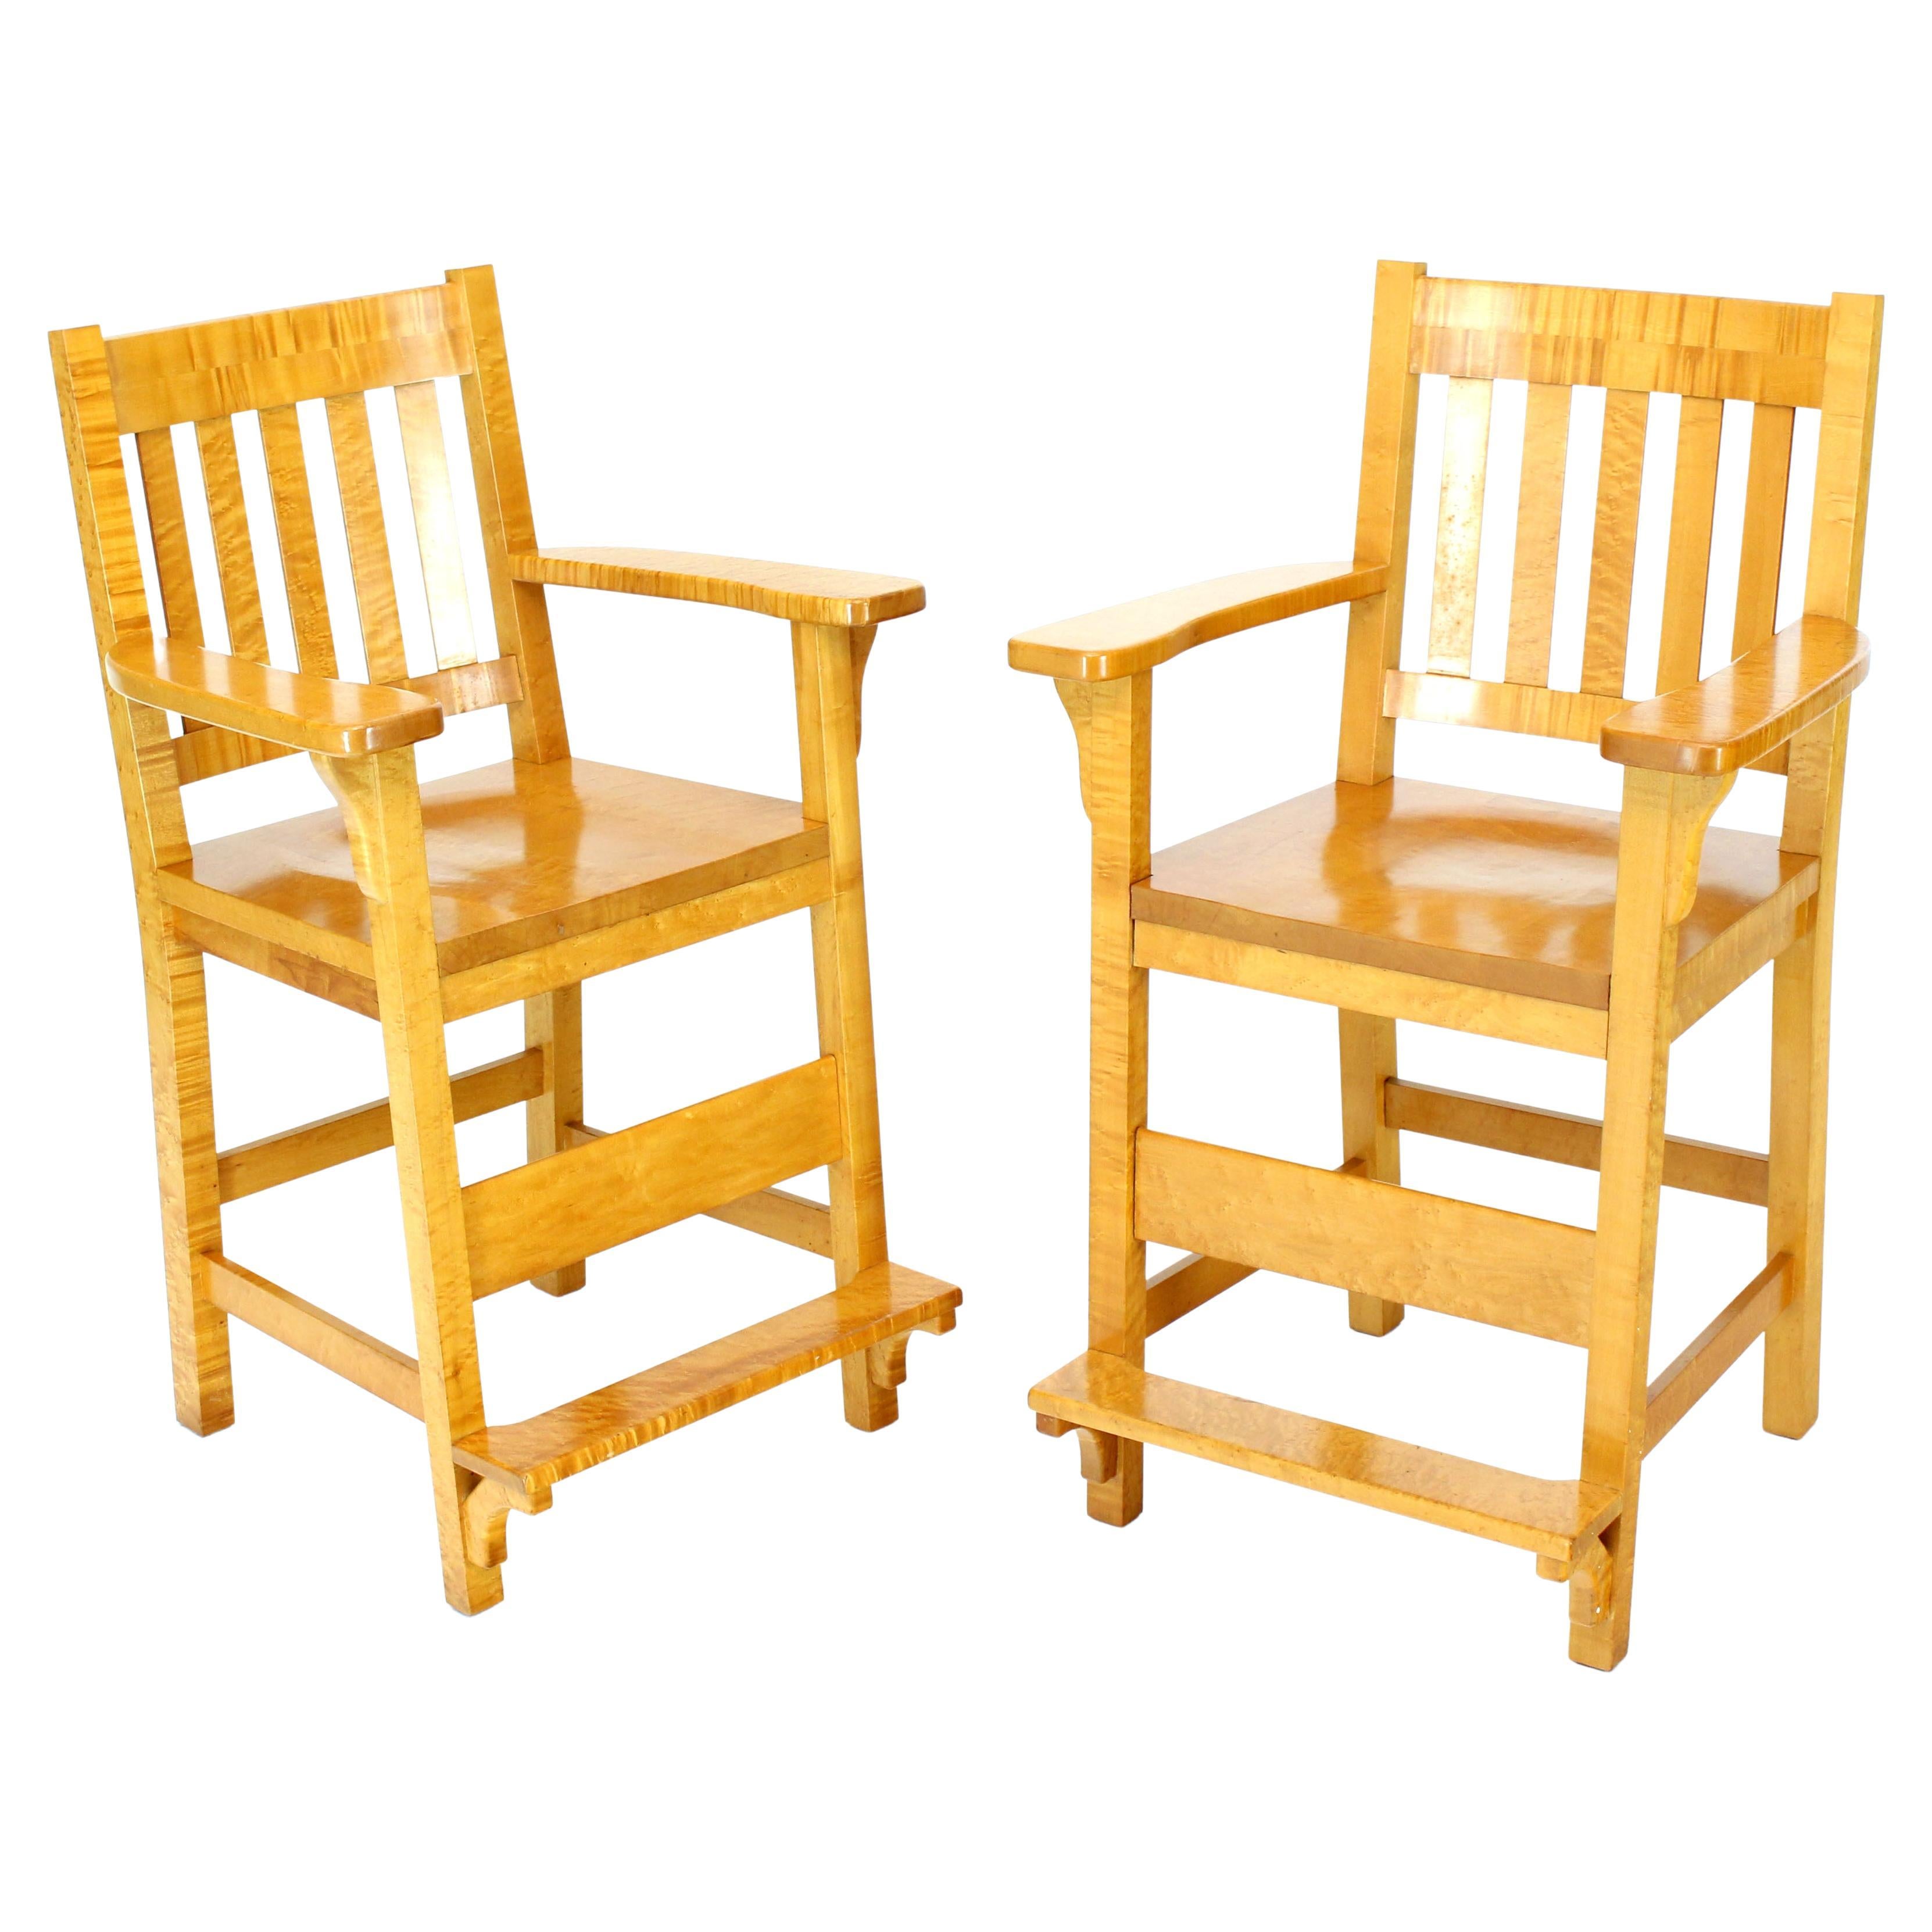 Solid Brid’s-Eye Maple High Pool Chairs Bar Stools For Sale